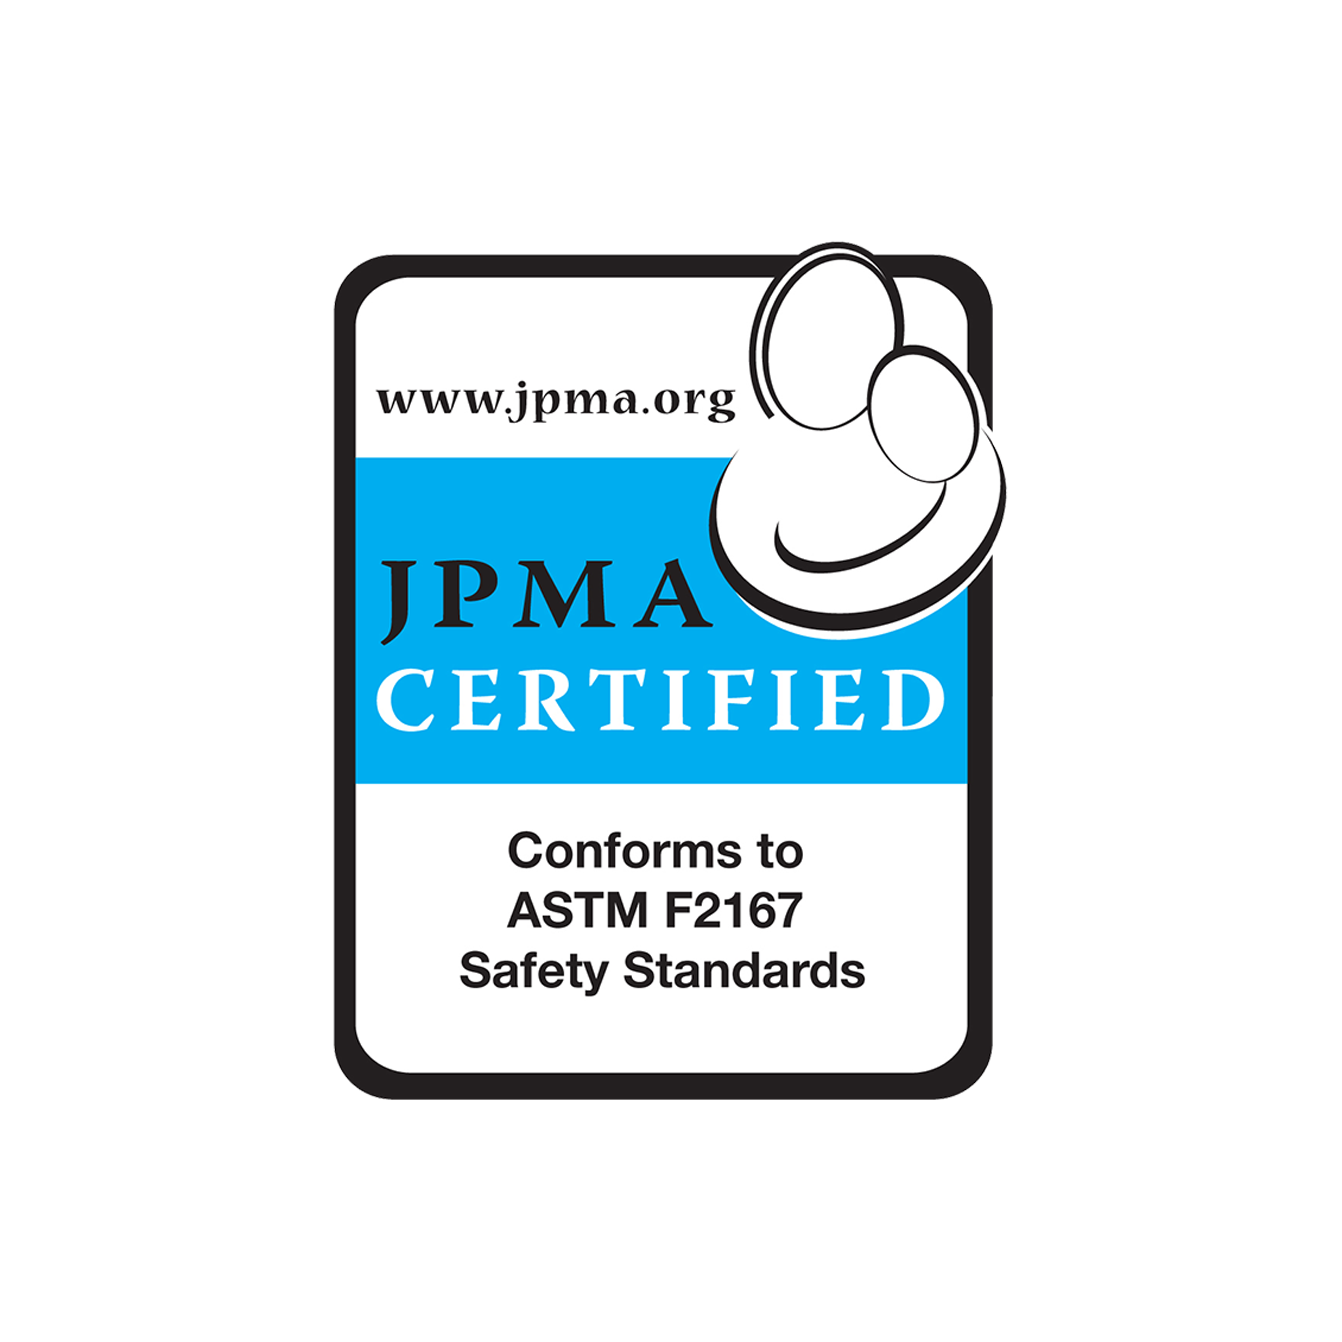 J P M A Certified Safety Standards Label PNG